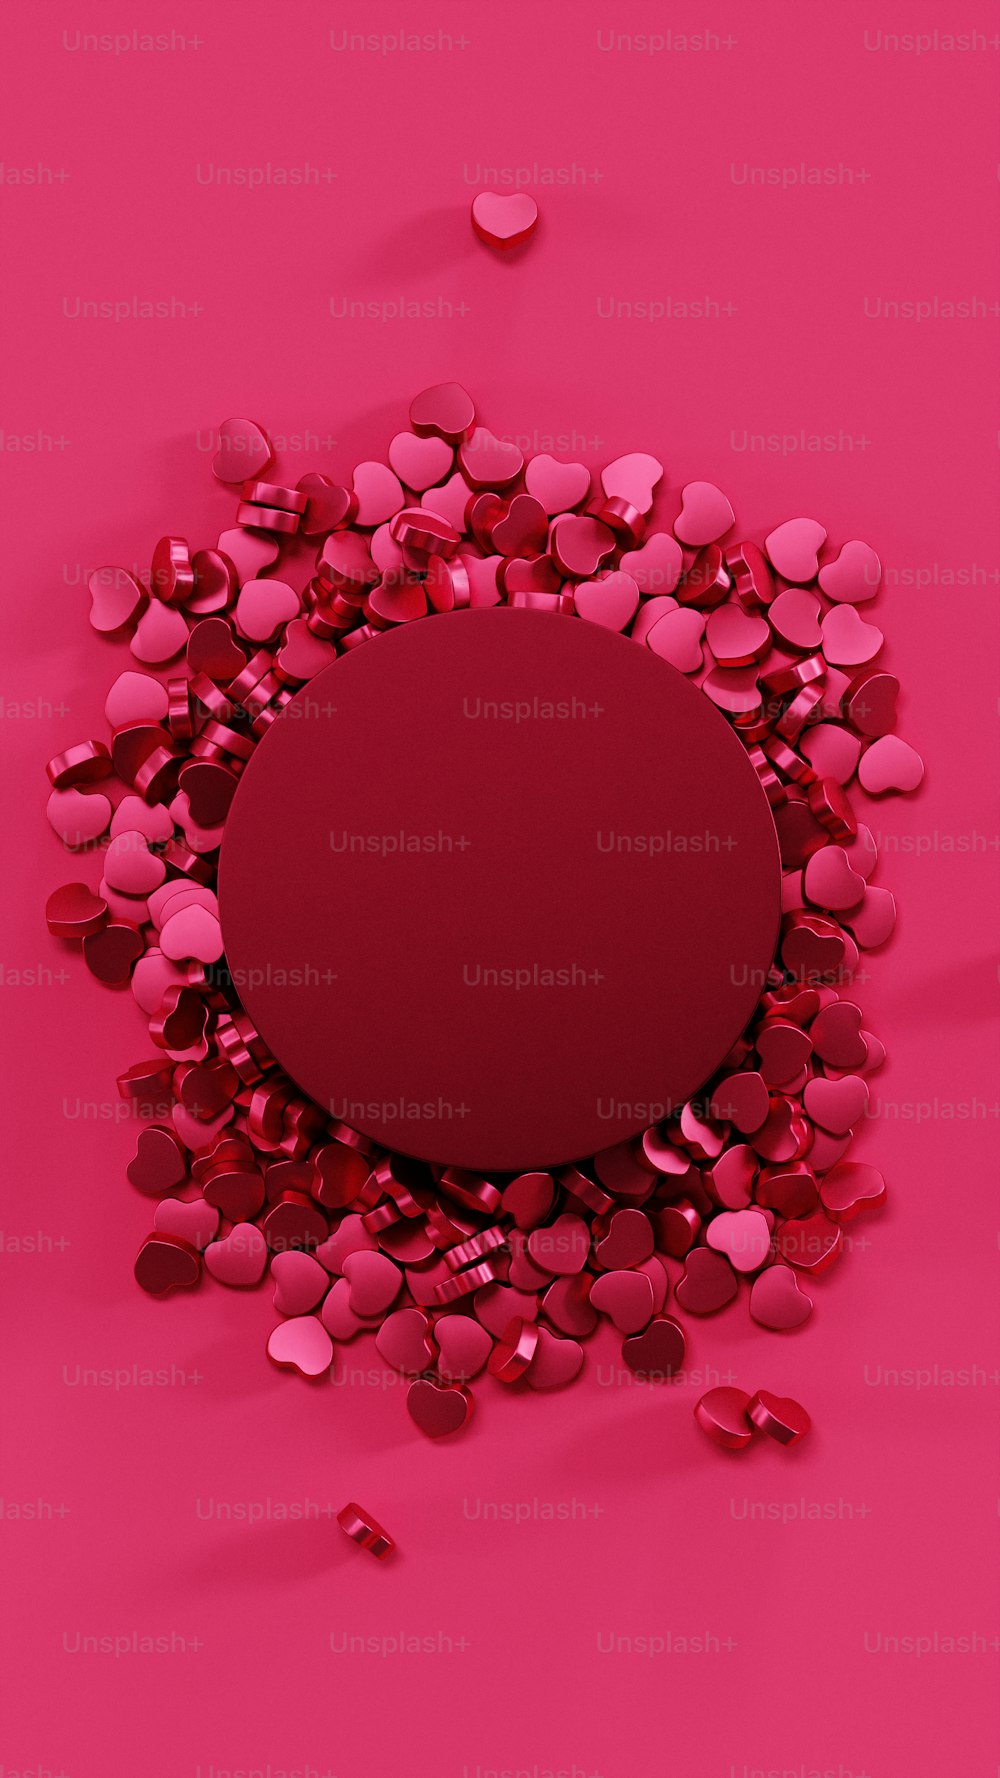 a red circle surrounded by hearts on a pink background